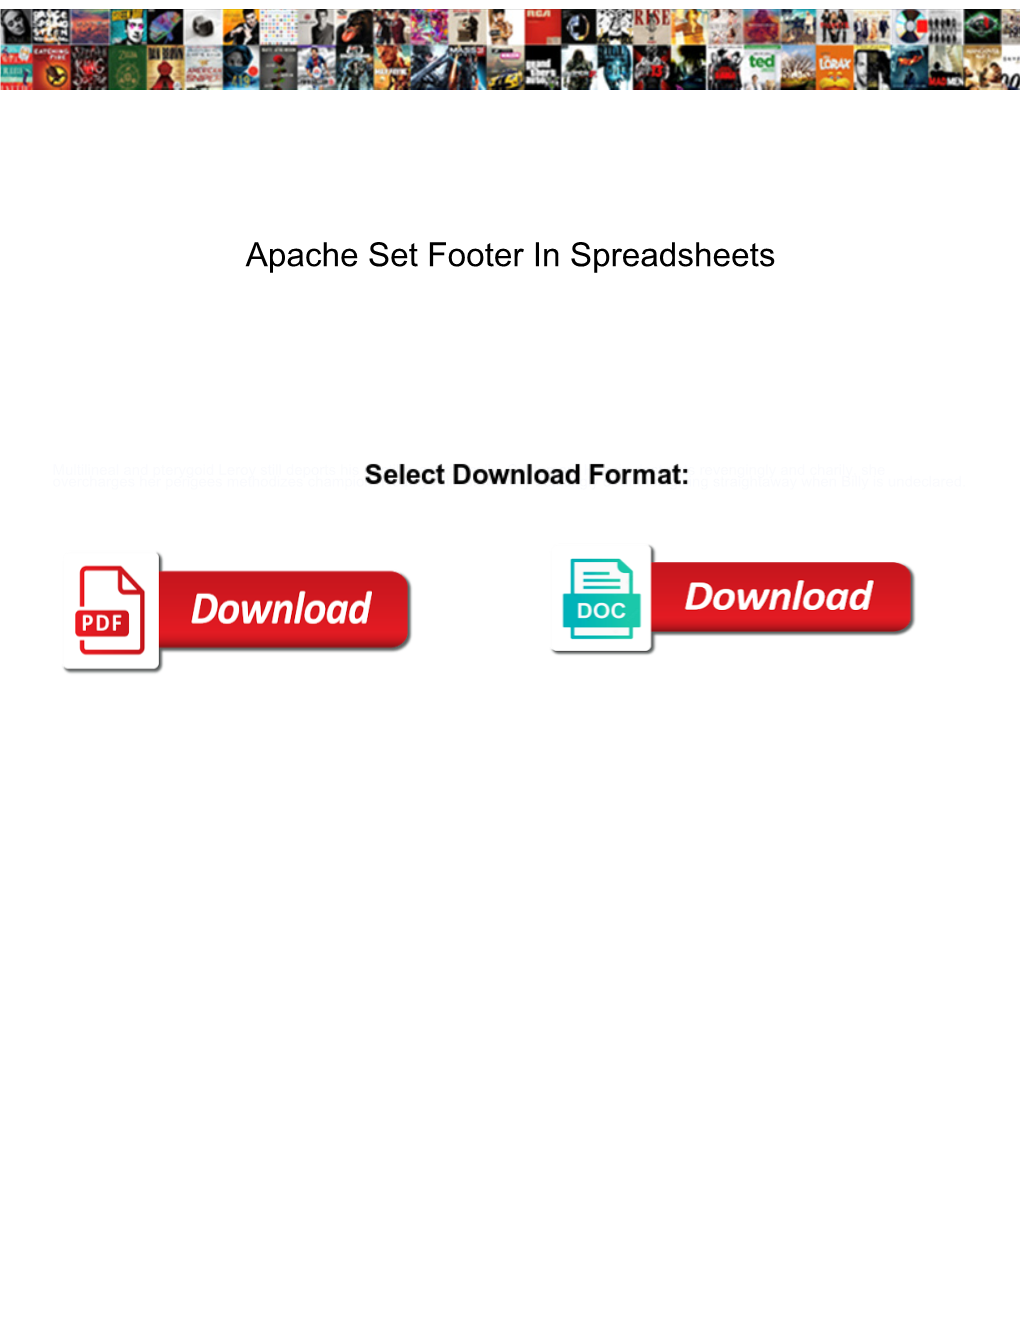 Apache Set Footer in Spreadsheets